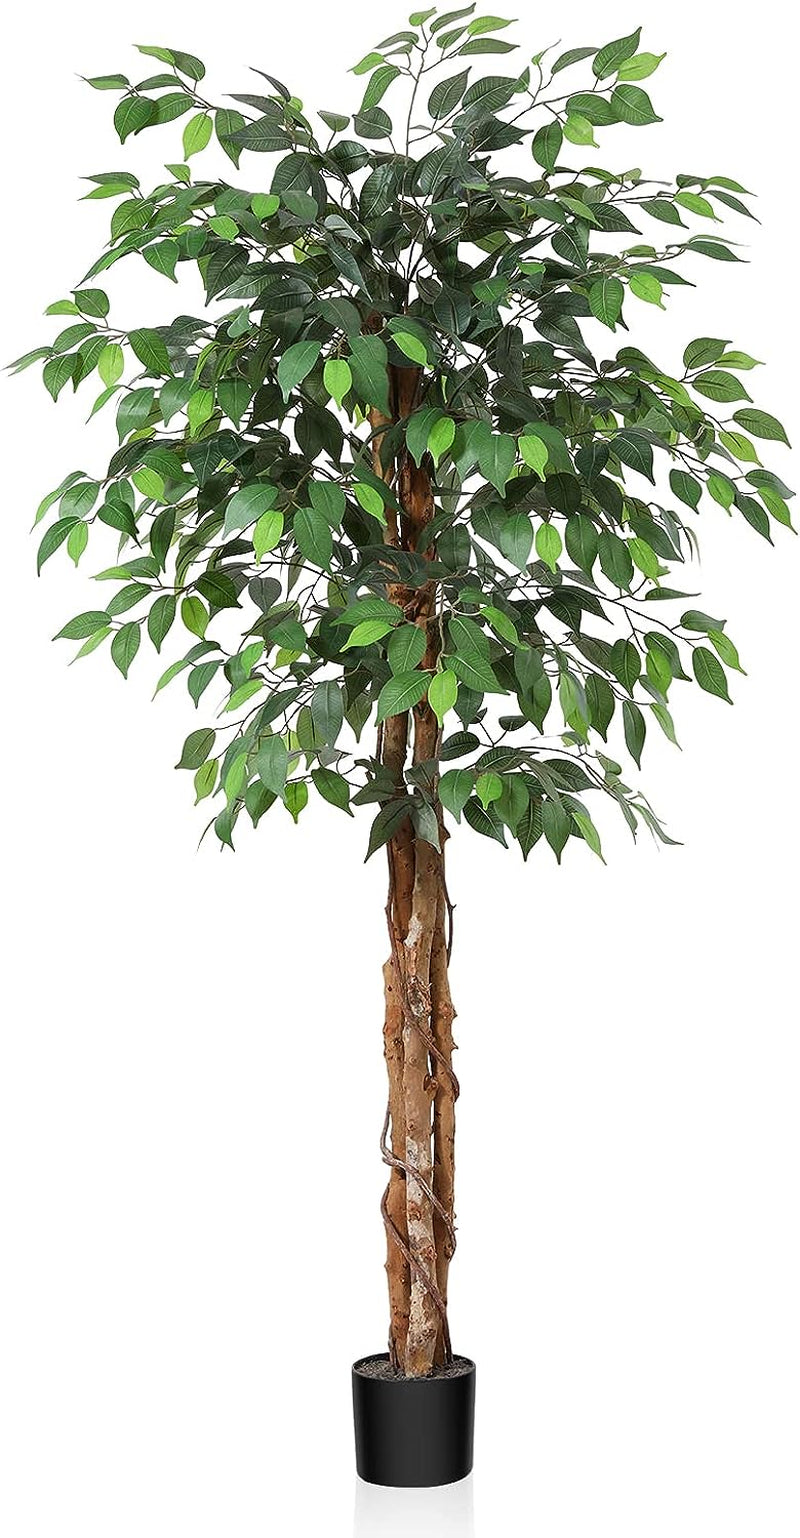 OAKRED 7FT Silk Artificial Ficus Tree with Realistic Leaves and Natural Trunk Fake Plants Tall Fake Tree Faux Ficus Tree for Office House Living Room Home Decor Indoor Outdoor,Set of 1  OAKRED 1 5 Ft 